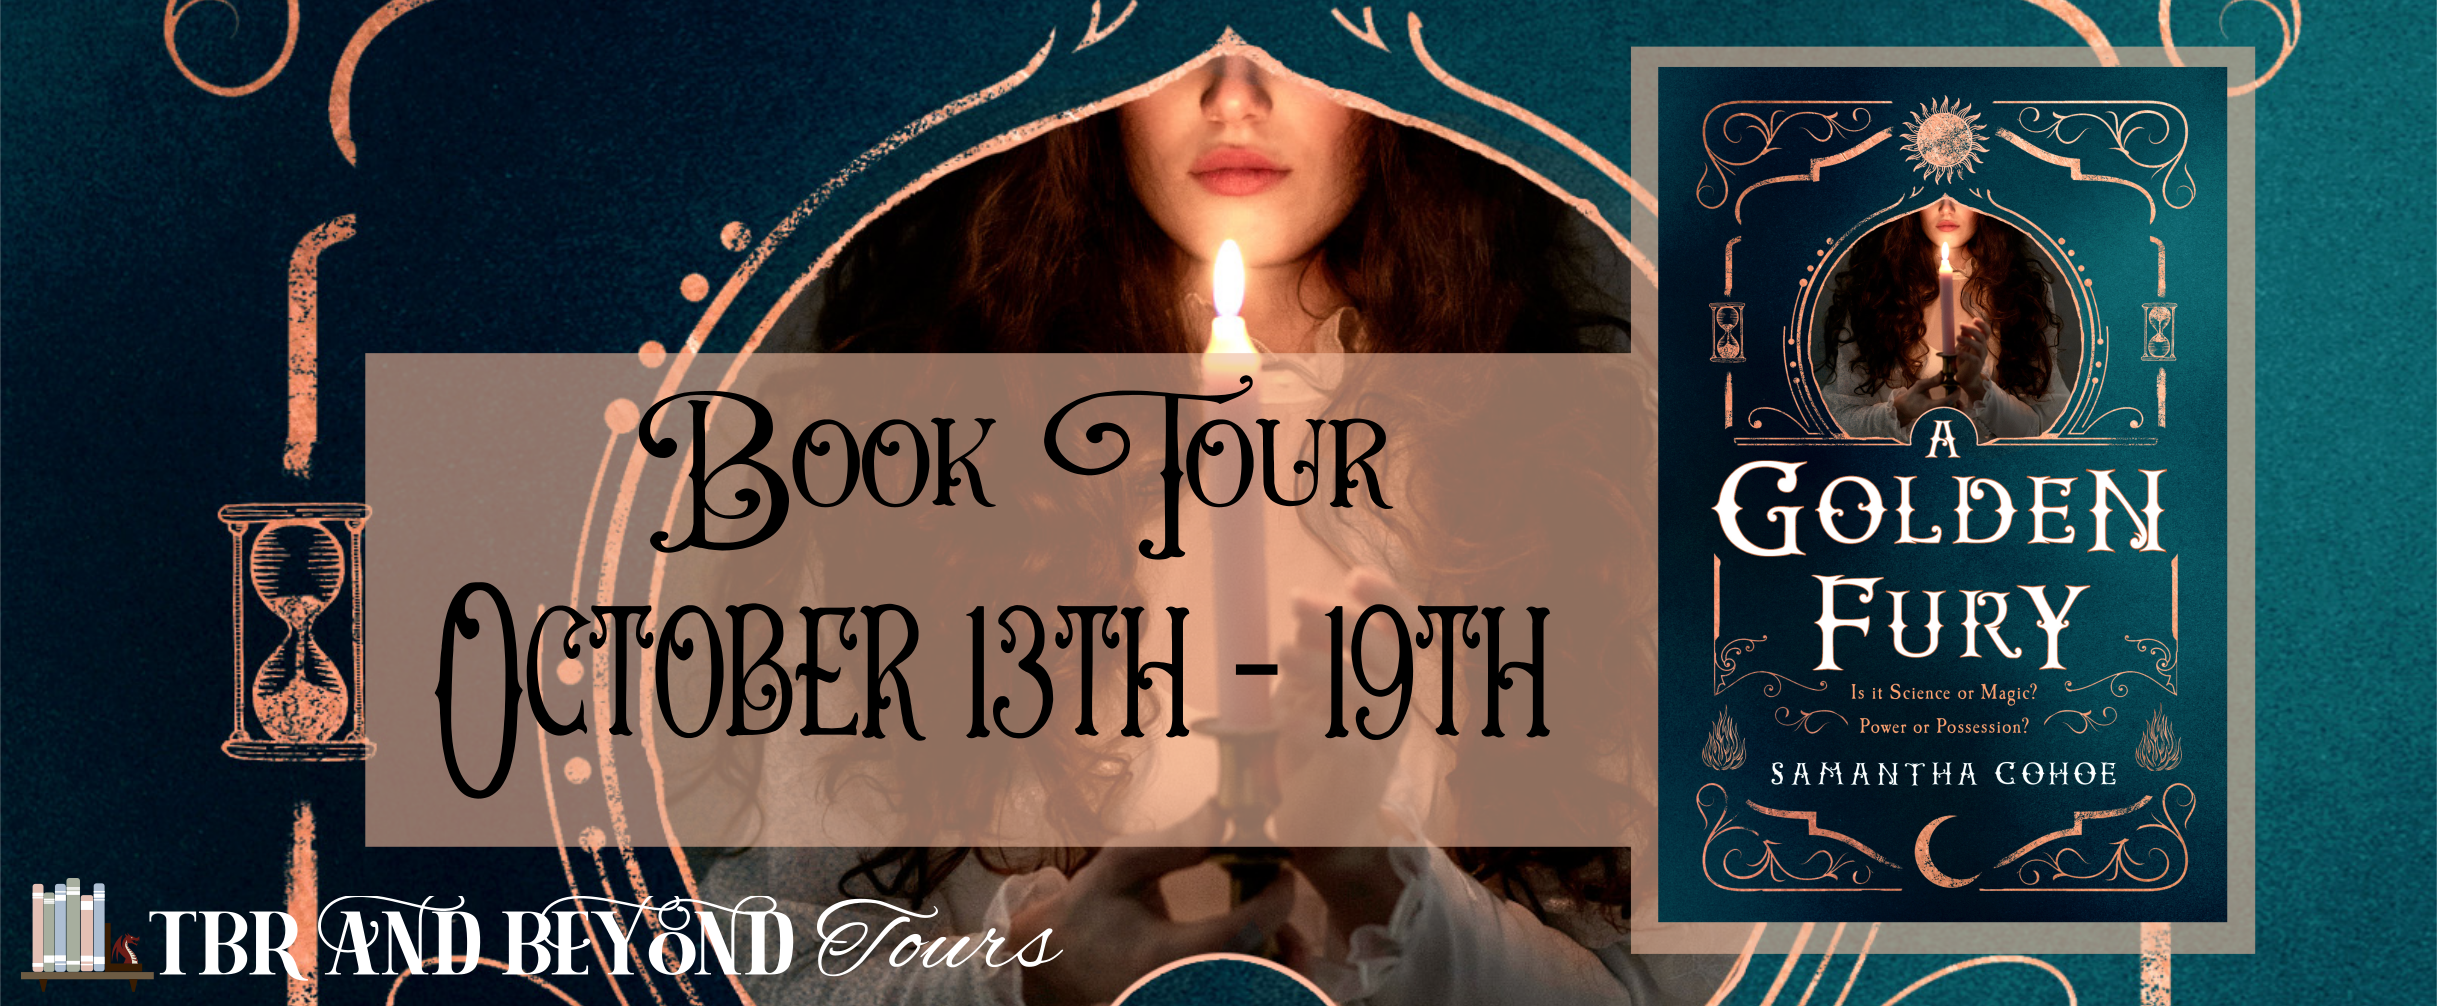 Blog Tour: A Golden Fury by Samantha Cohoe (Top Ten + Bookstagram + Giveaway!)